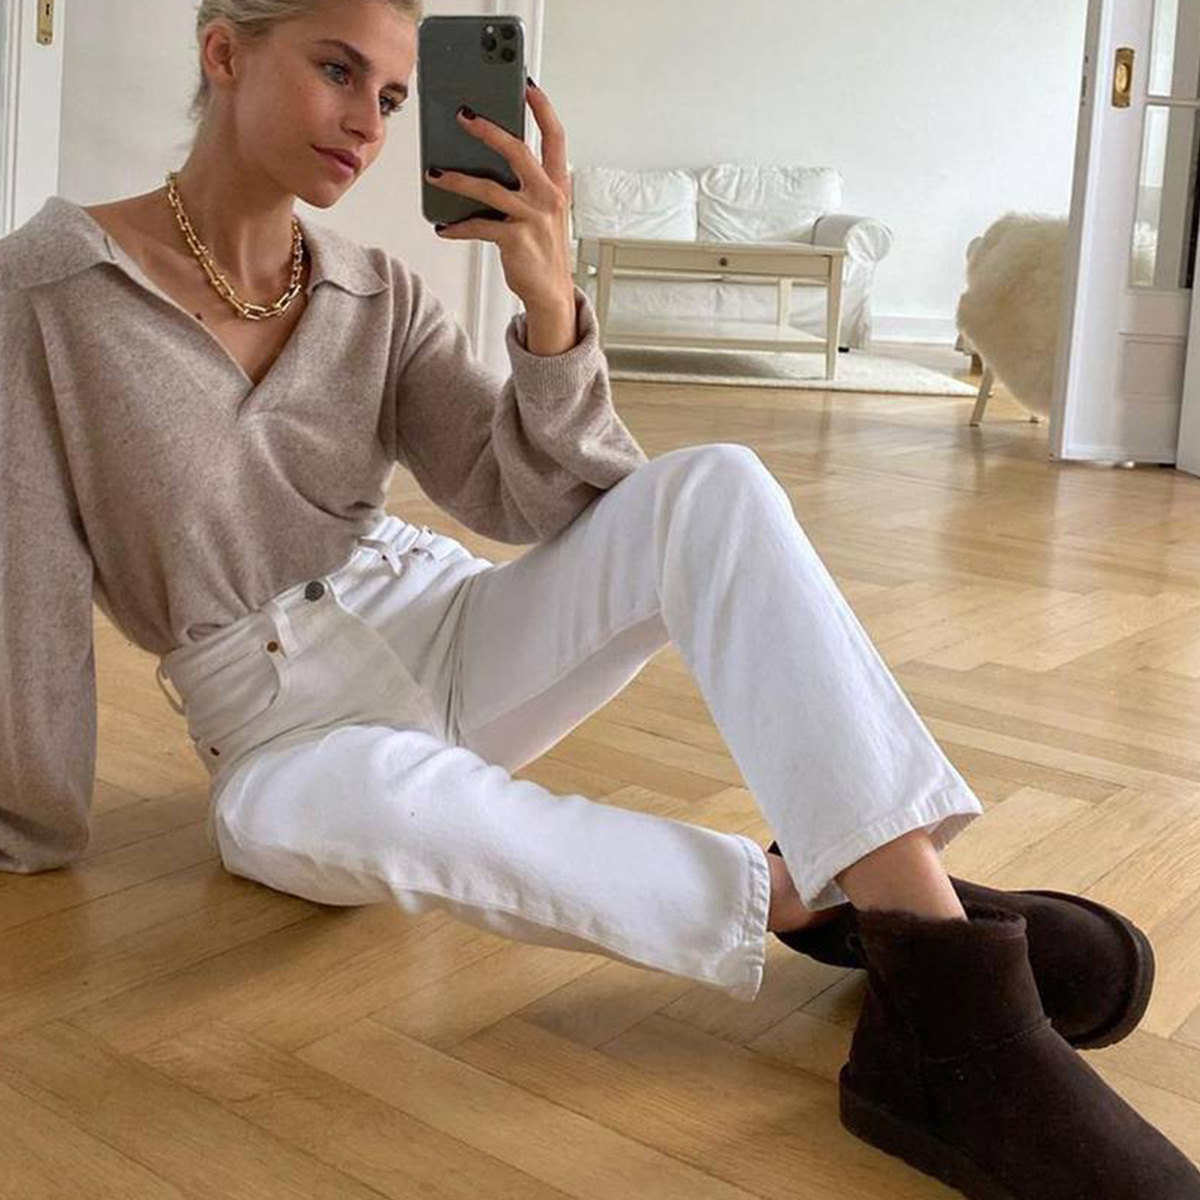 9 Ugg Outfits That Prove Those Boots and Slides Are Way More Versatile Than  You Thought